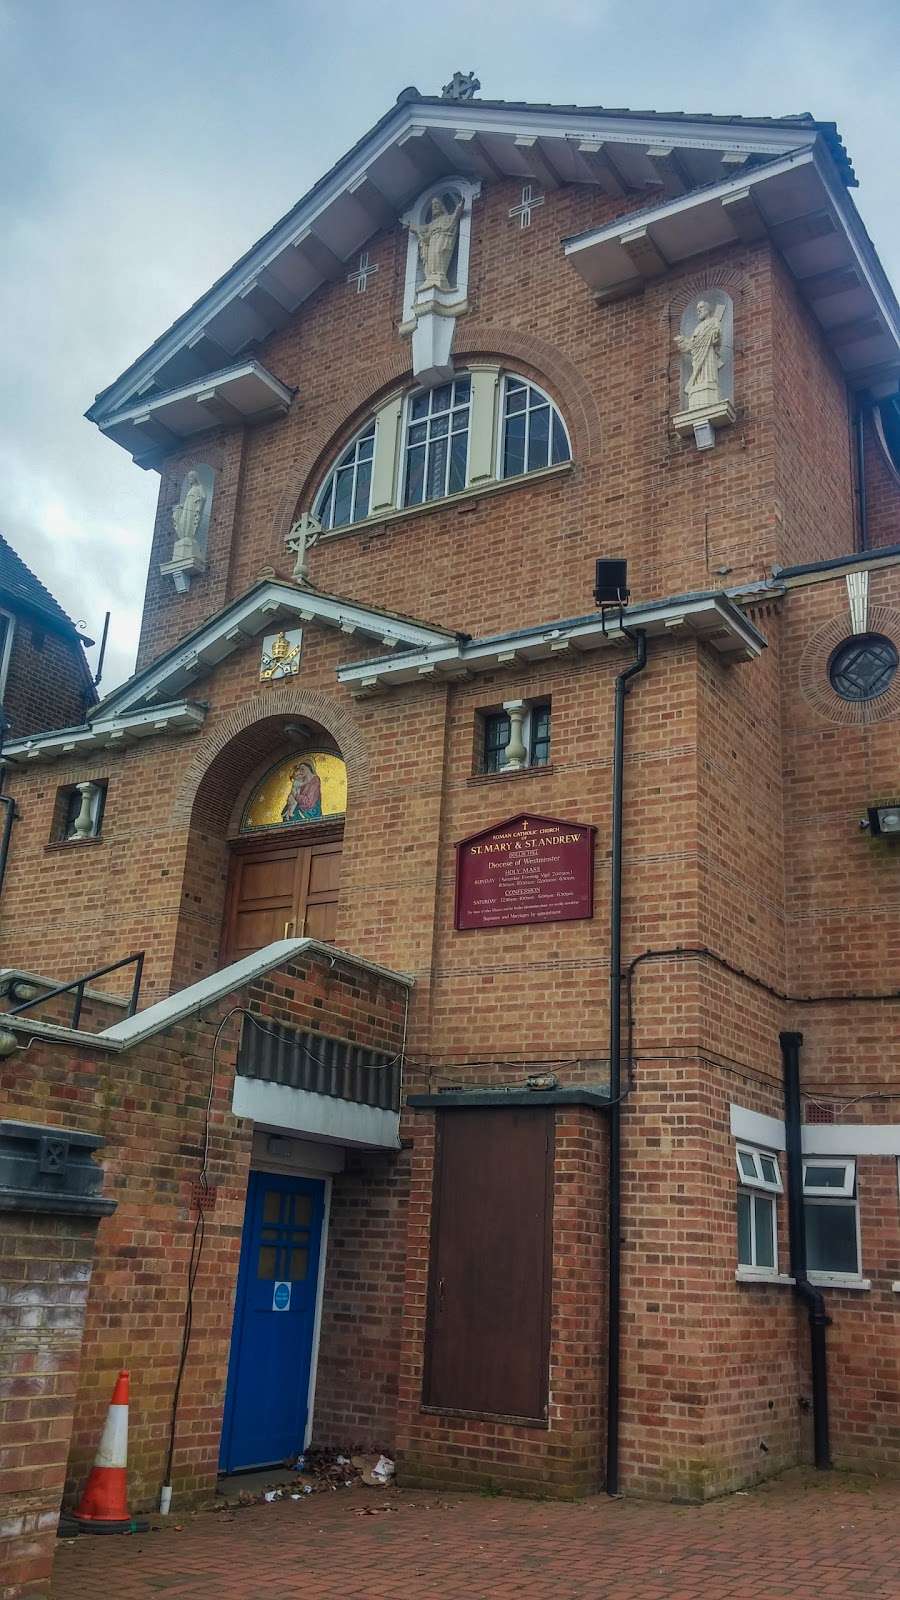 St Mary & St Andrew R C Church | 216 Dollis Hill Ln, London NW2 6HE, UK | Phone: 020 8452 6158